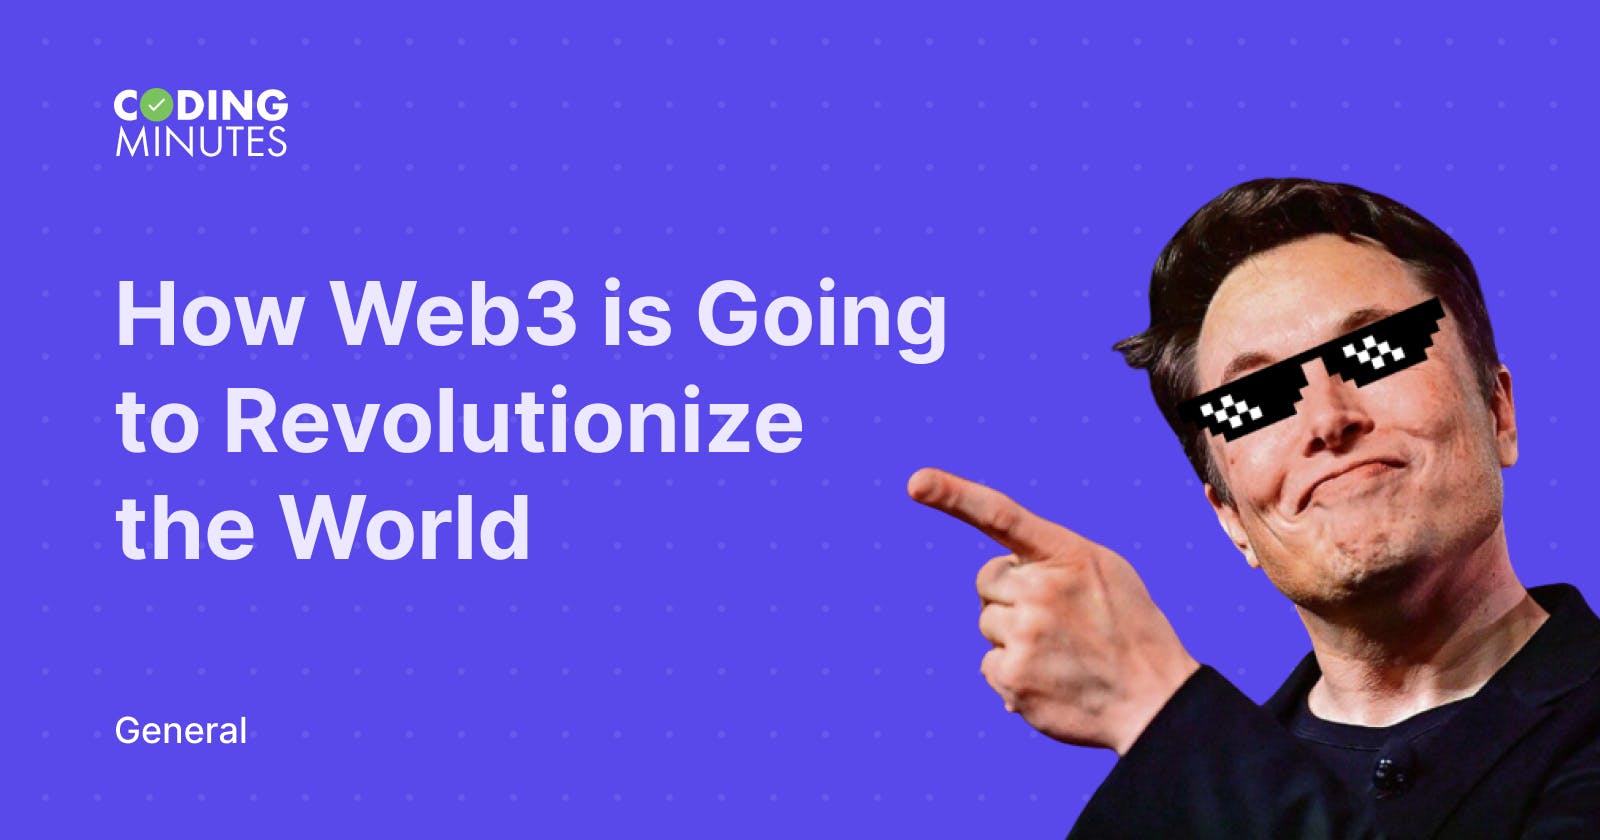 How Web3 is Going to Revolutionize the World